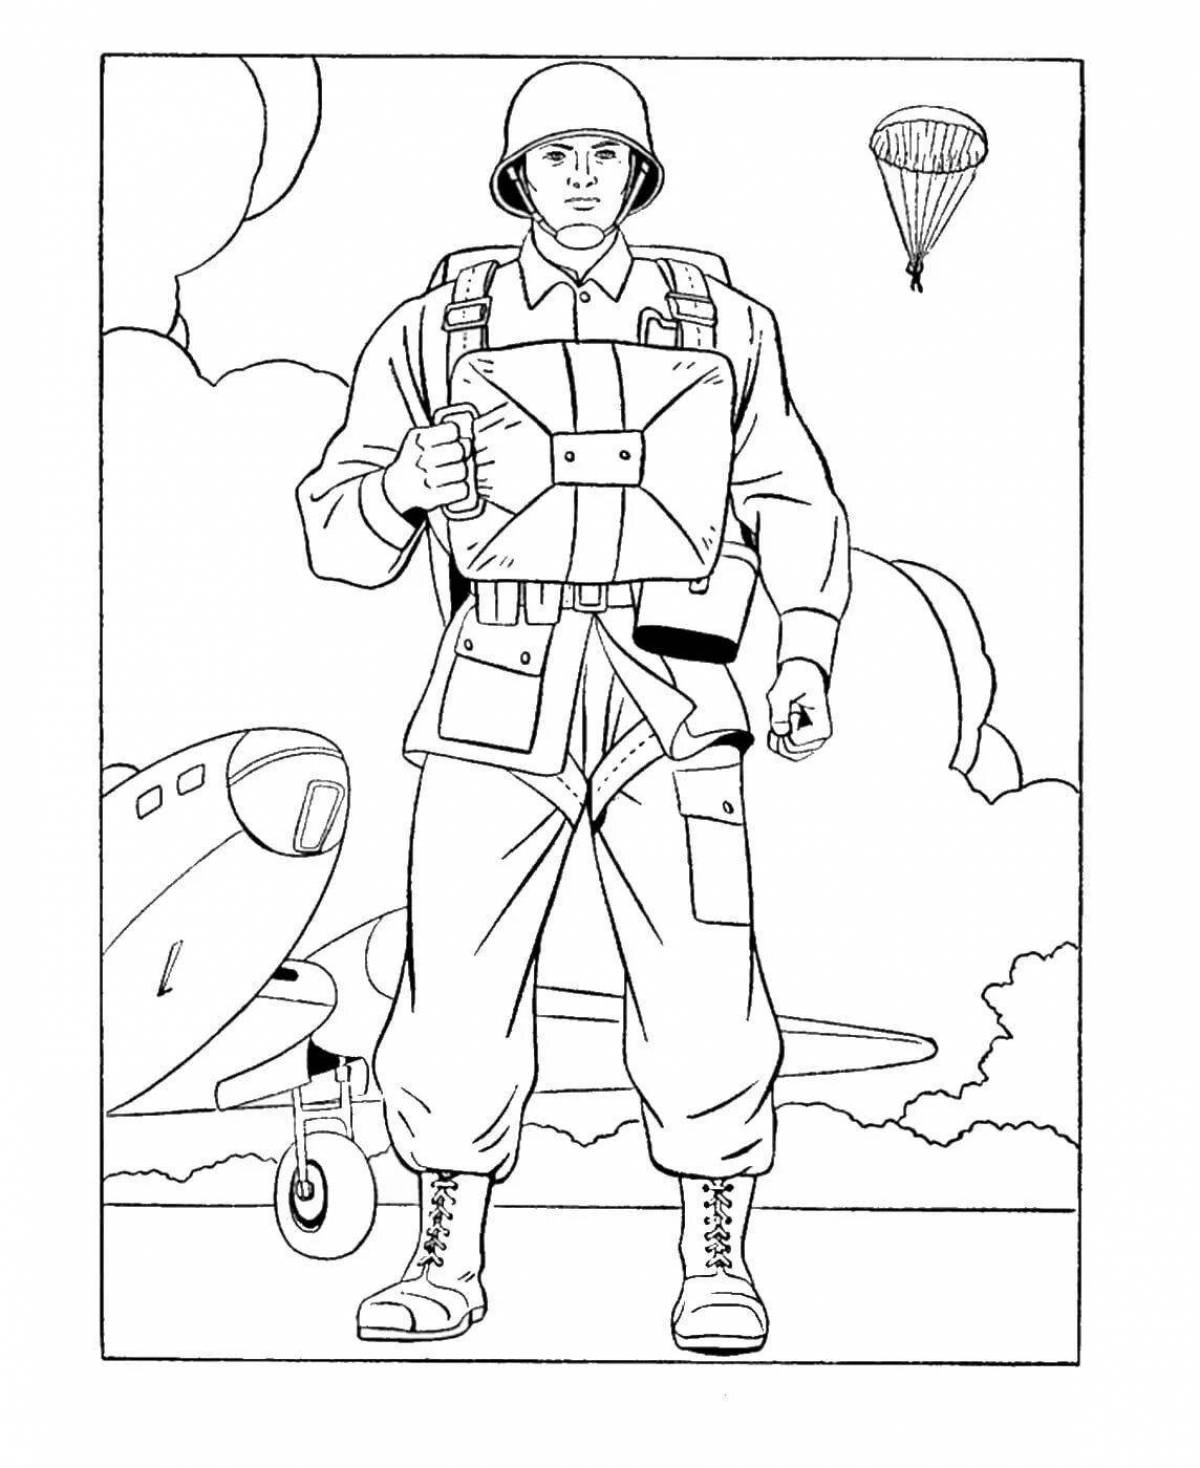 Modern soldier dynamic coloring book for kids